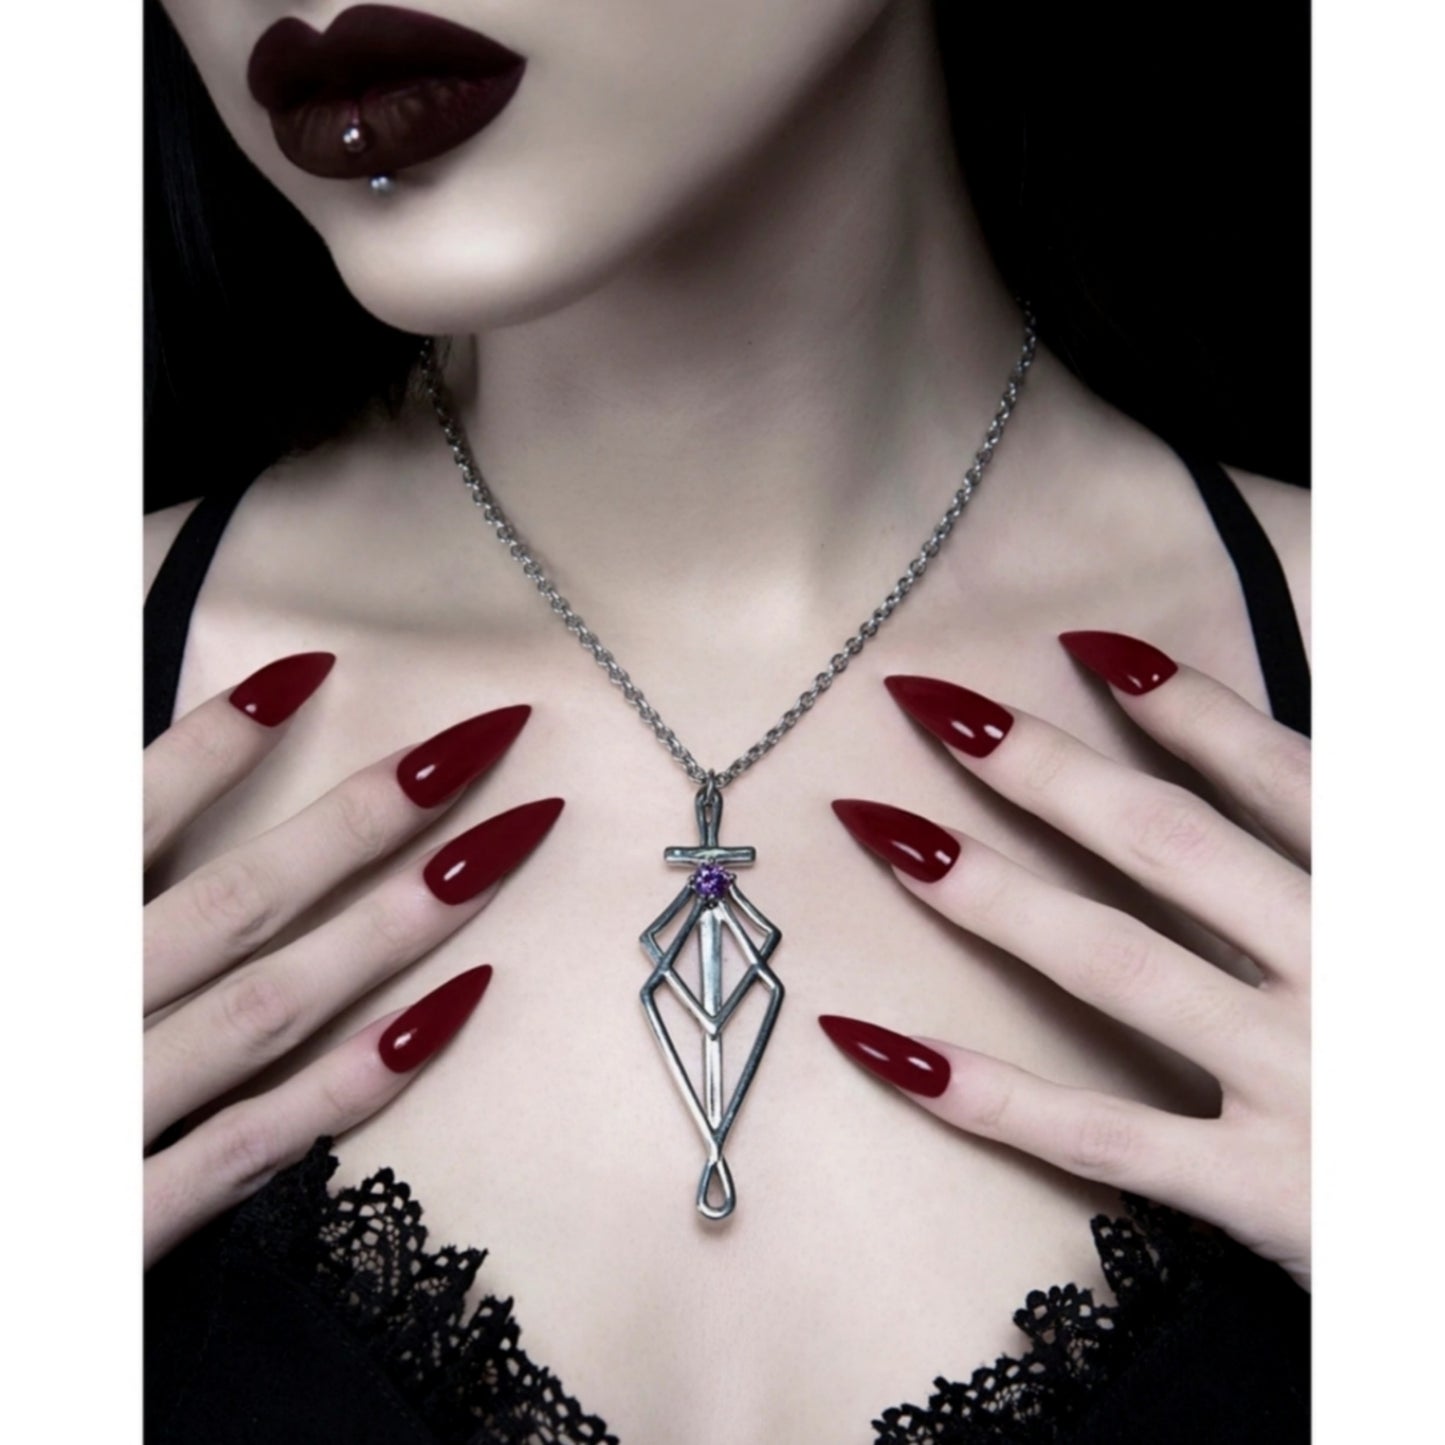 Mirror Stainless Steel Necklace | Spider Silk Amethyst 925 Silver - Rogue + Wolf - Necklaces